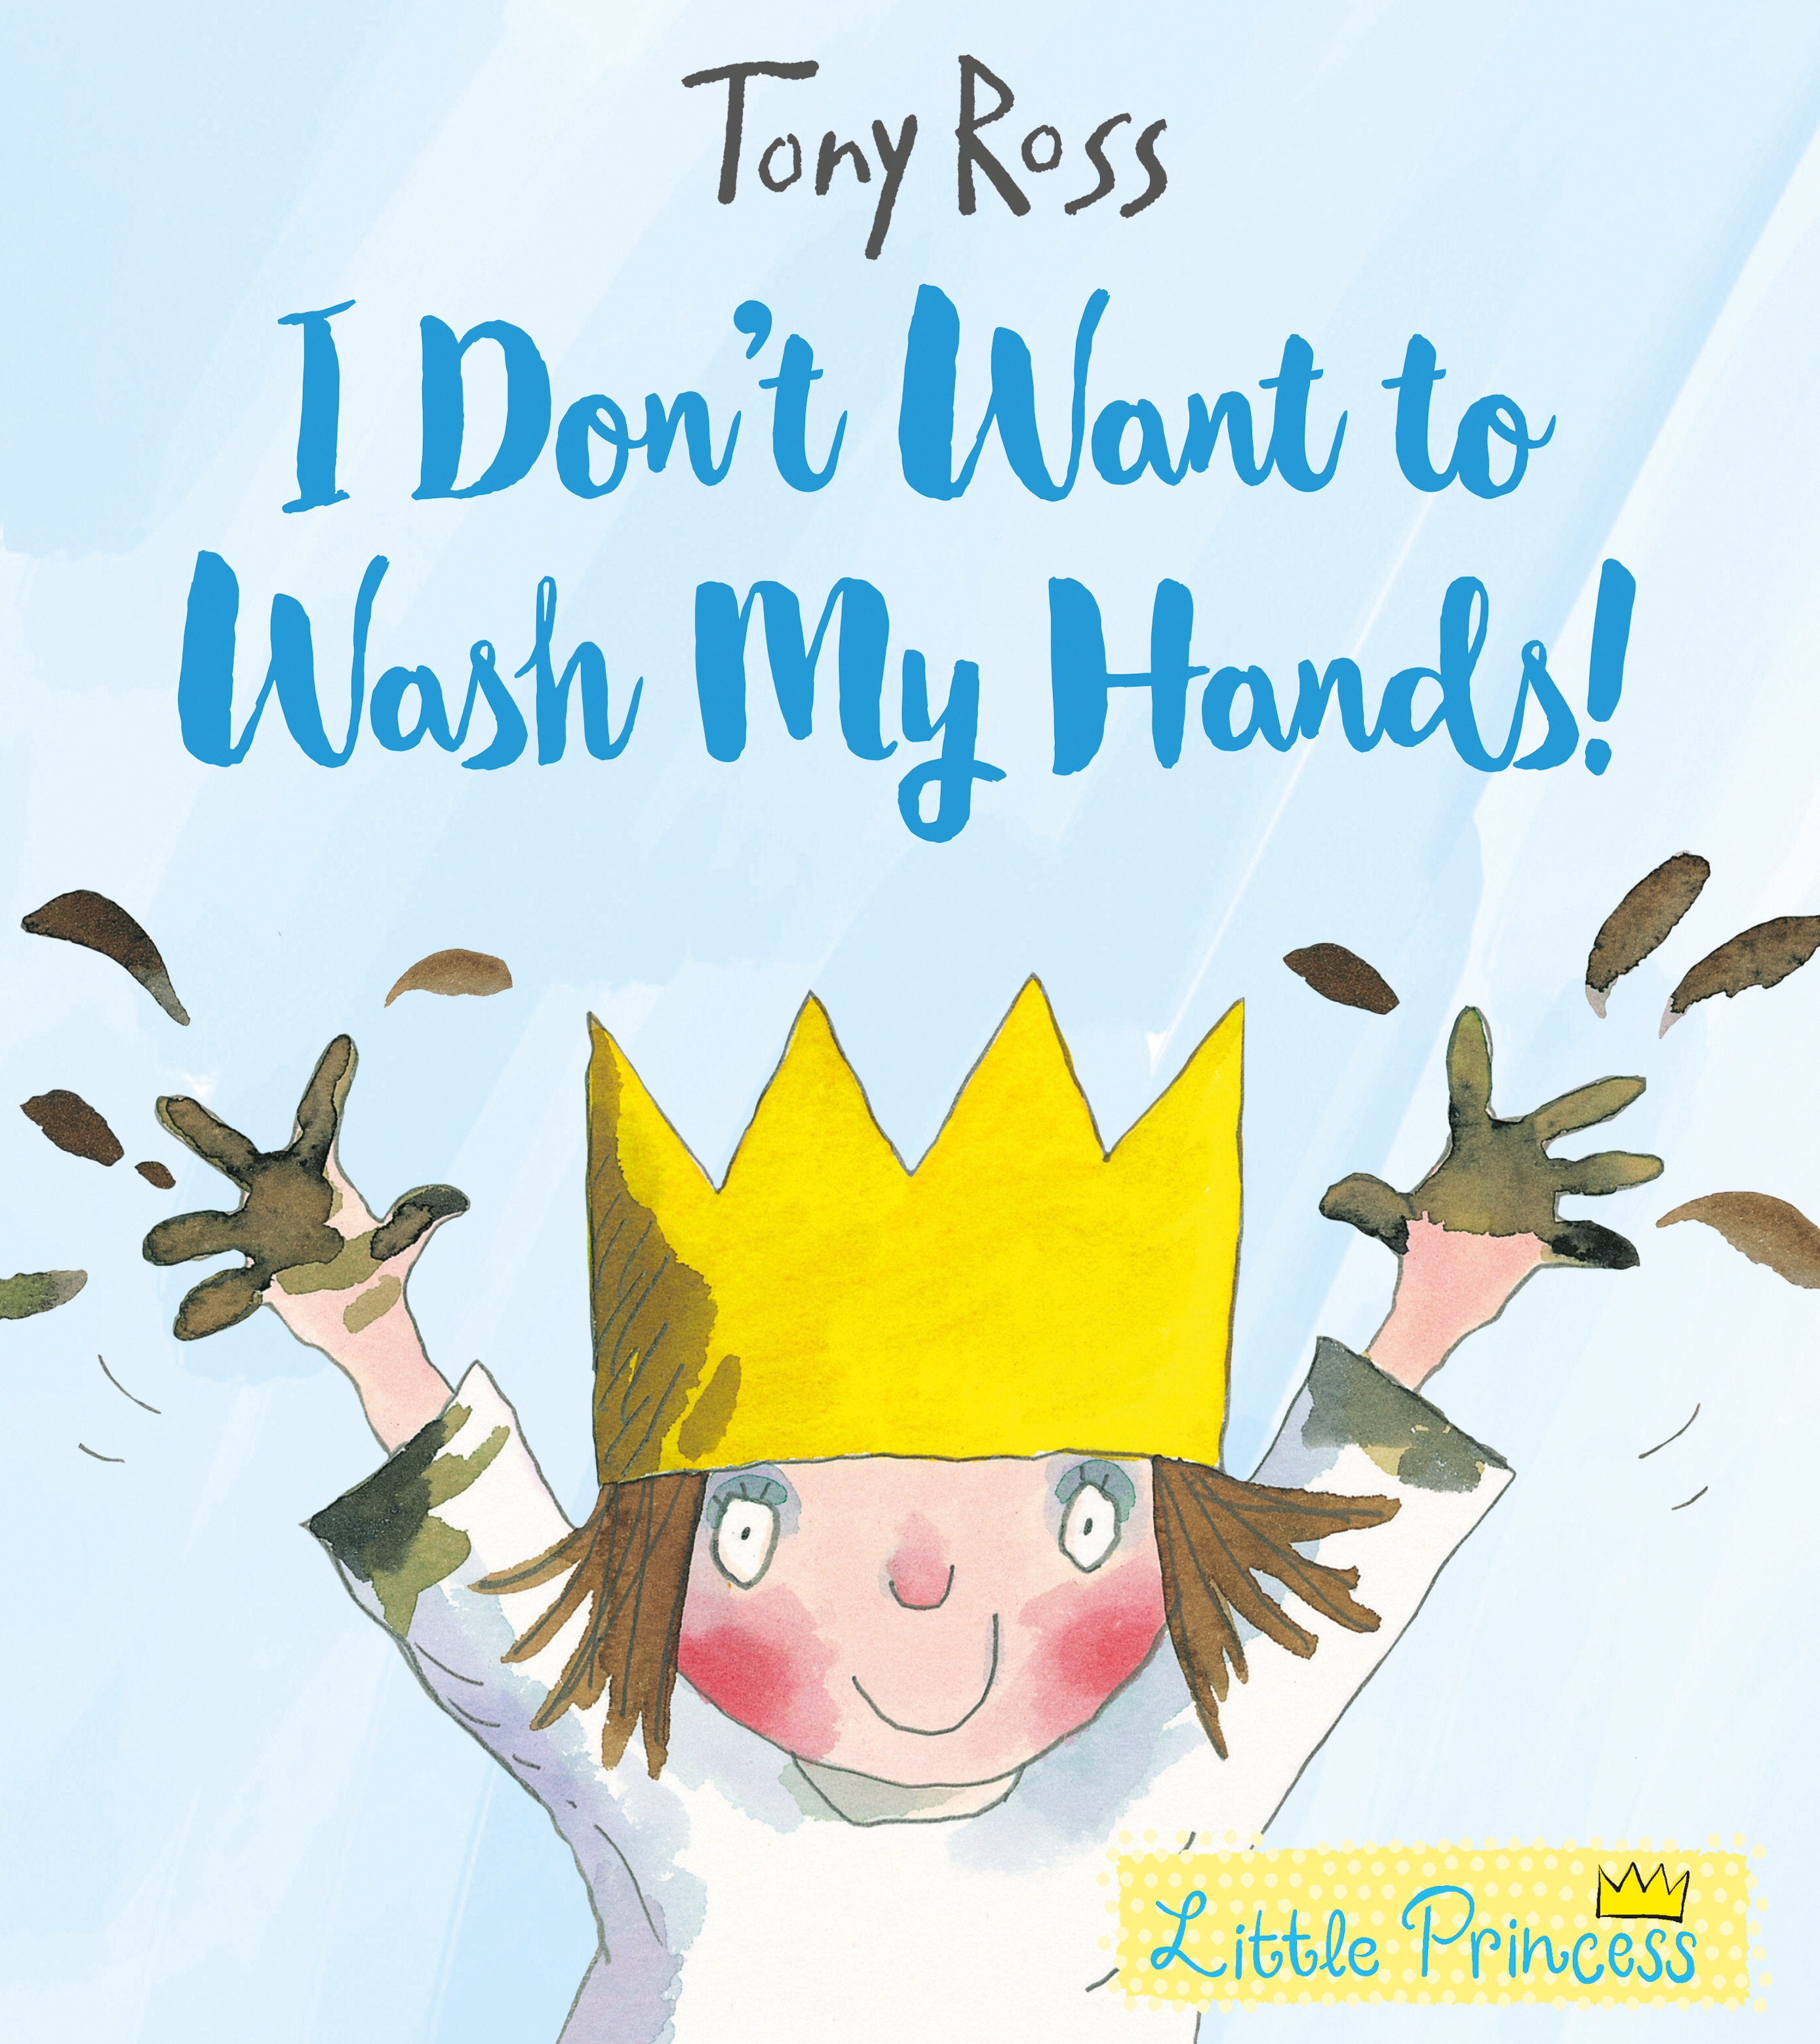 Book “I Don't Want to Wash My Hands!” by Tony Ross — September 7, 2017